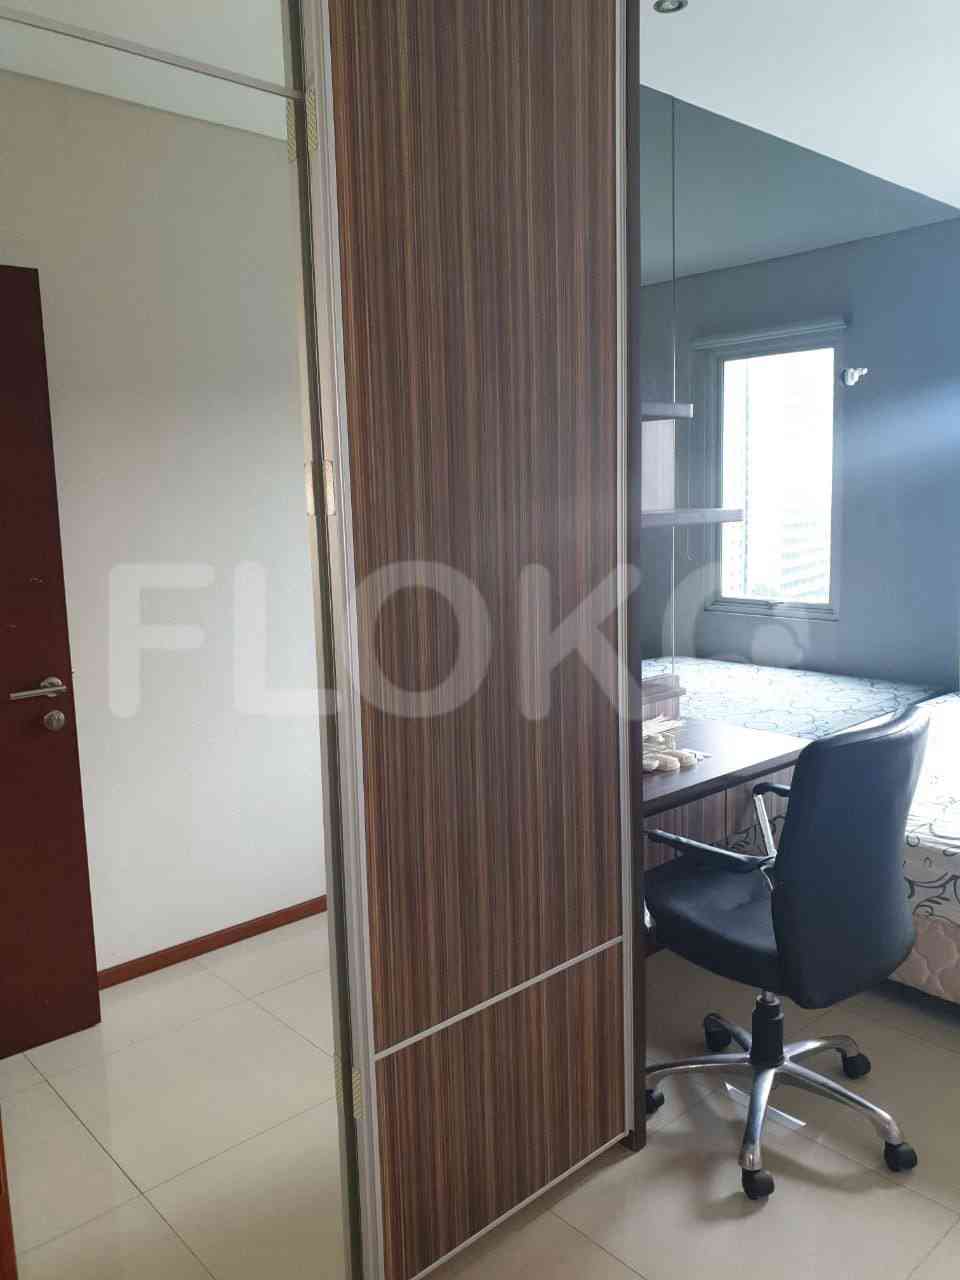 2 Bedroom on 8th Floor for Rent in Thamrin Residence Apartment - fth05c 10